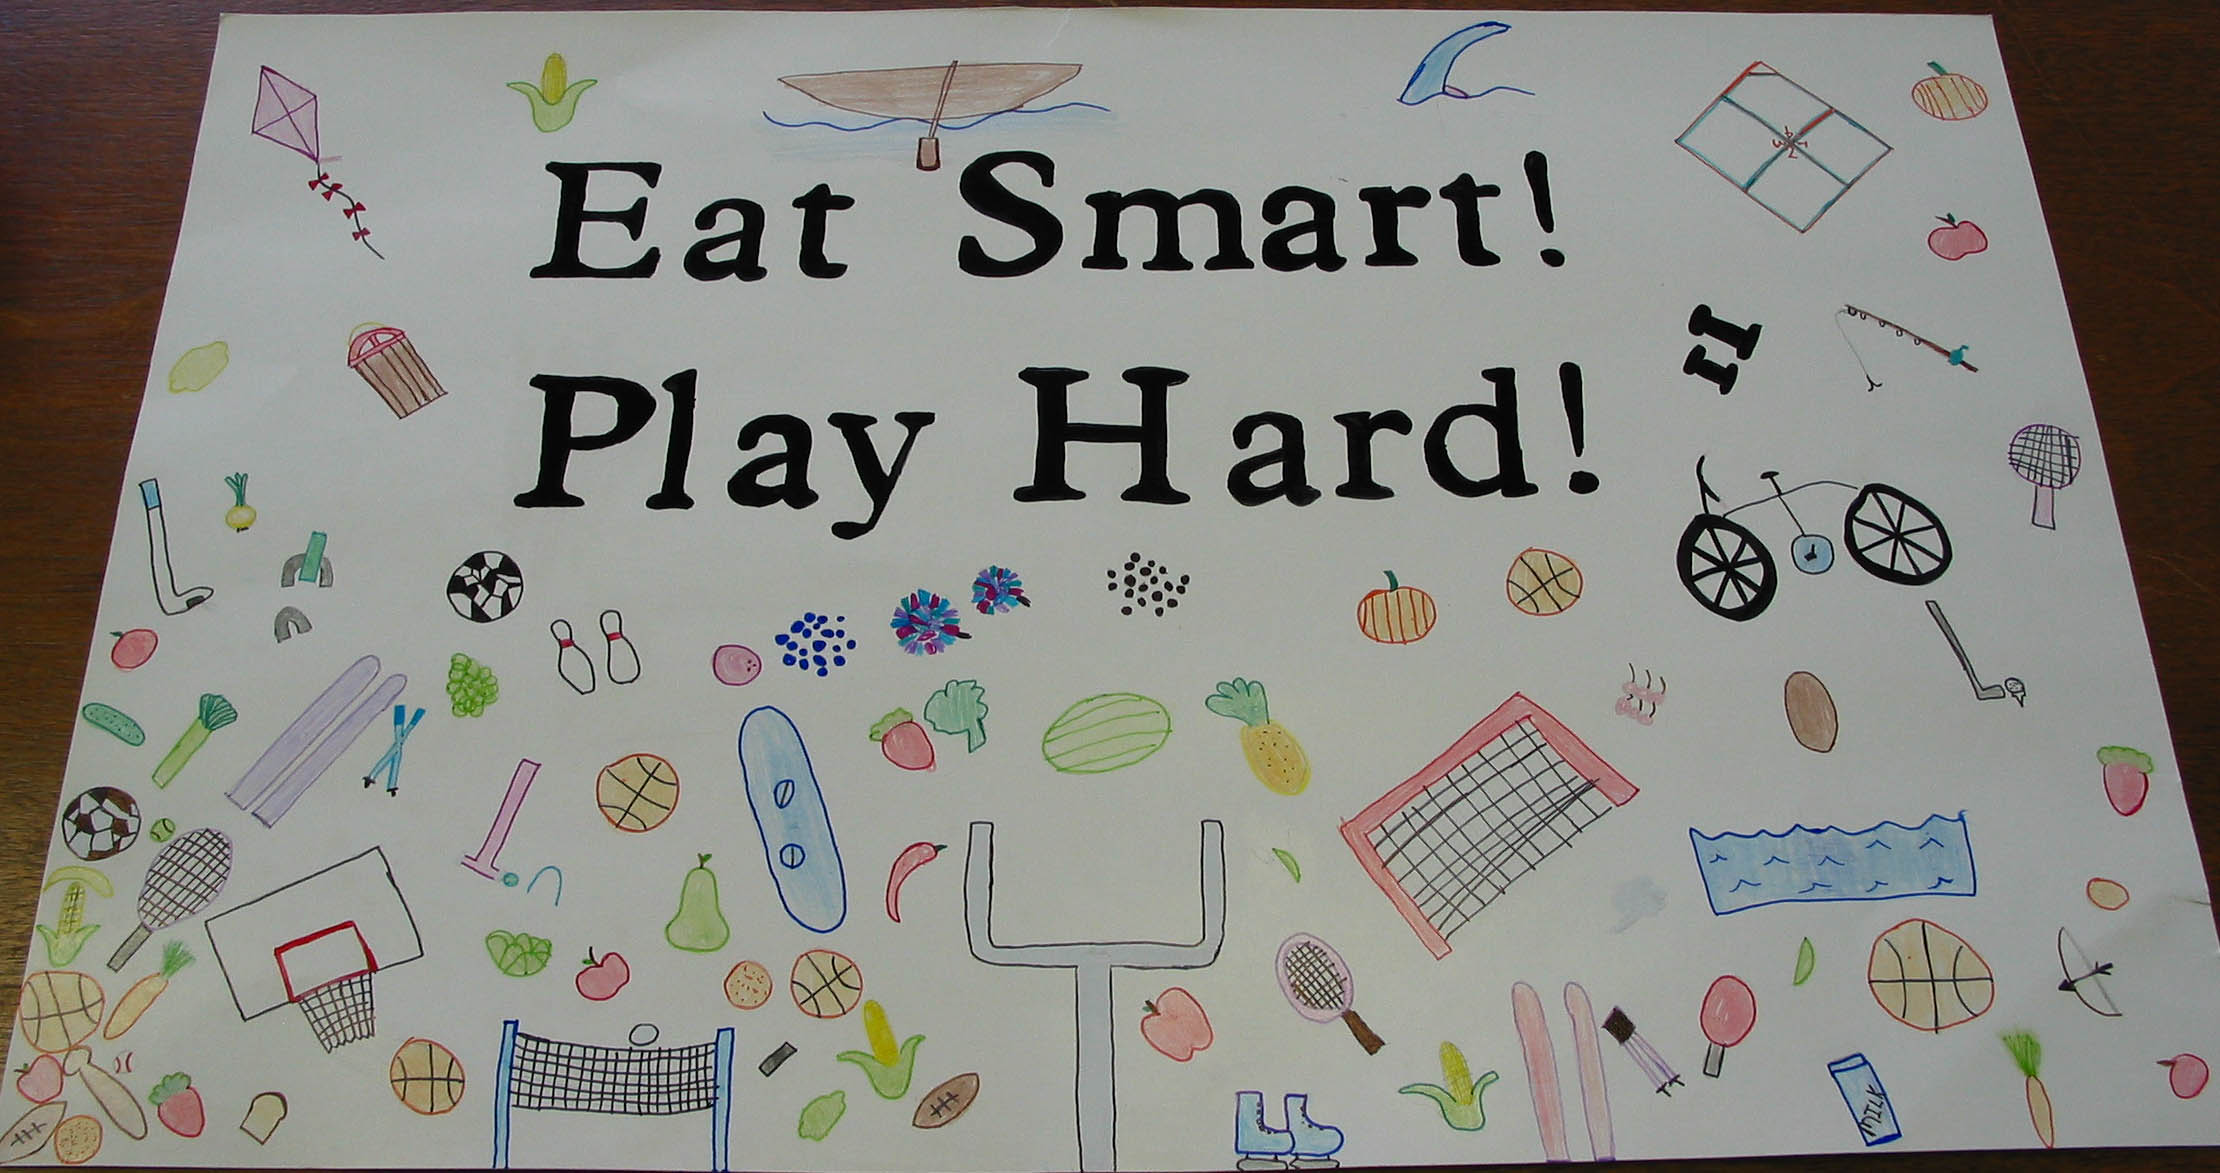 Casondra Rutschke of Linton placed third in the preteen division of this spring's ""Eat Smart. Play Hard."" poster contest.